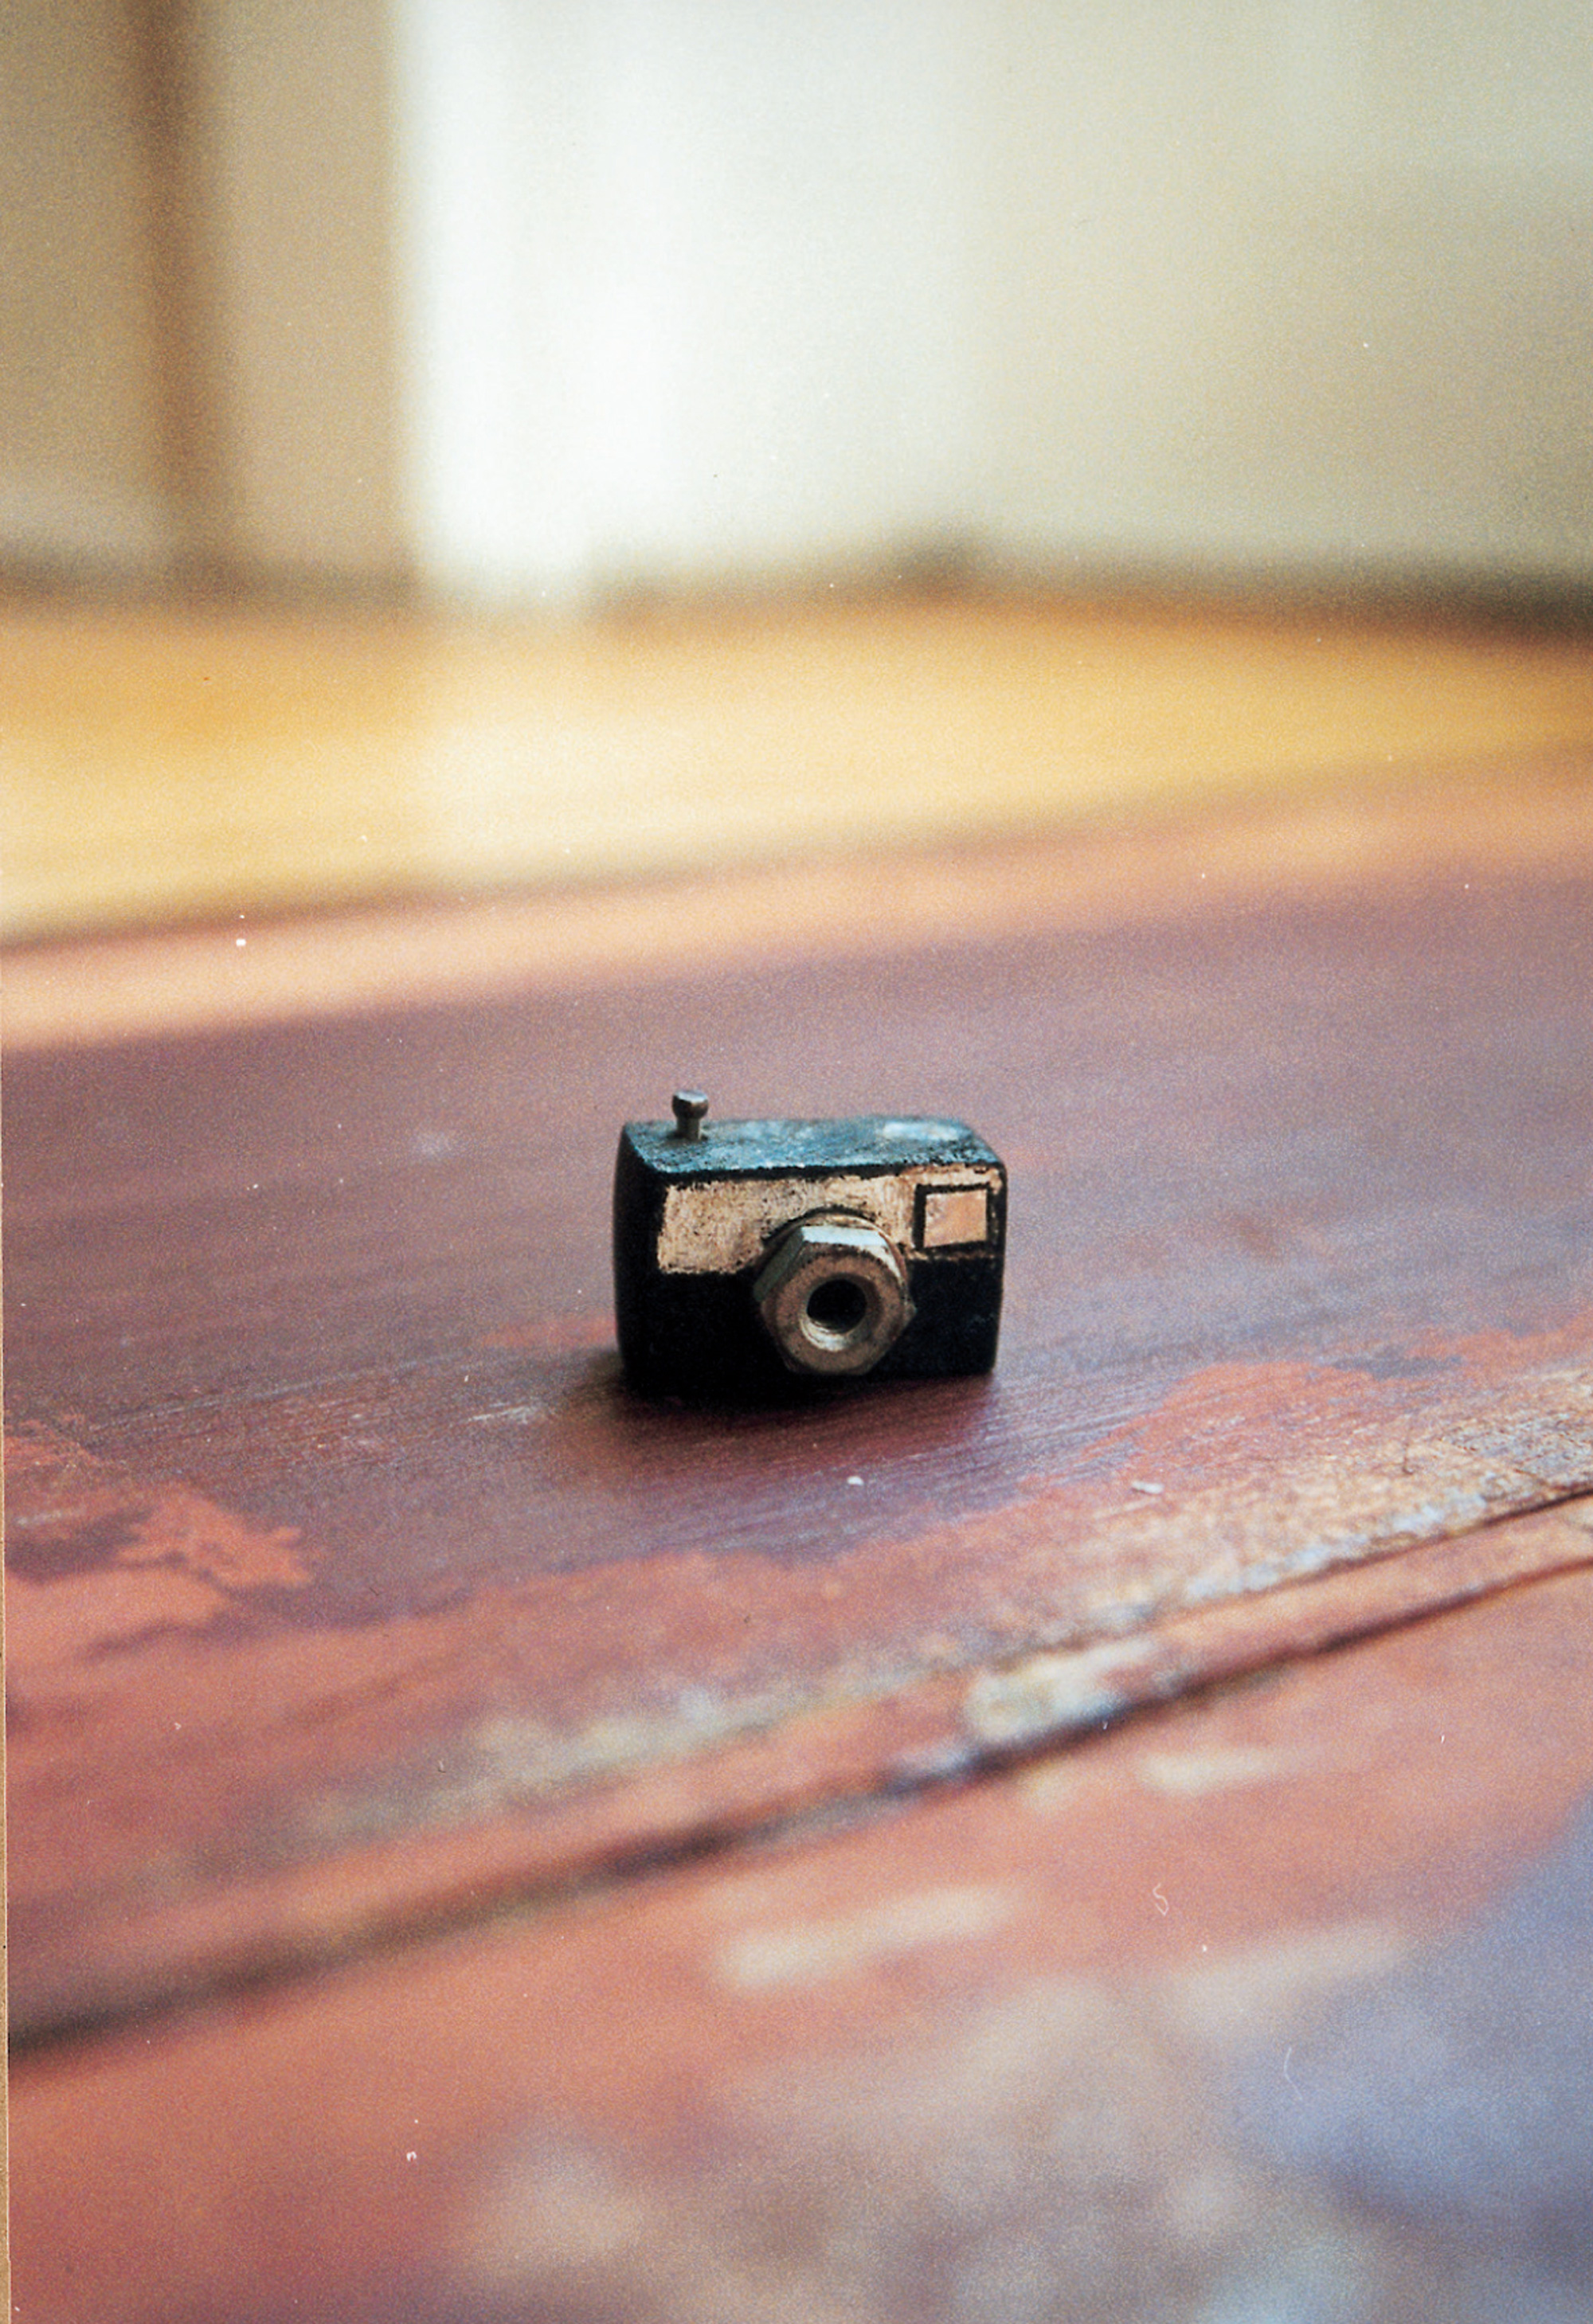 A photograph depicting a small crafted camera. The caption reads: Camera. Rectangular block of wood painted black with a white strip accenting the front, where a nut and washer together form the lens. The viewfinder window is indicated on this side by a small rectangle of silver metallic paper or tape inset in the white strip and outlined in black. On the top of the camera the head of a small nail driven most of the way into the body of the camera represents the shutter release. On the back of the camera a small strip of yellow paper is glued to the center. On it is printed “1—1” to represent the exposure number. This camera, loaded with self-reflexive implications (and a full roll of film), also points to the voyeurism/exhibitionism so characteristic of Doll Games plots.
